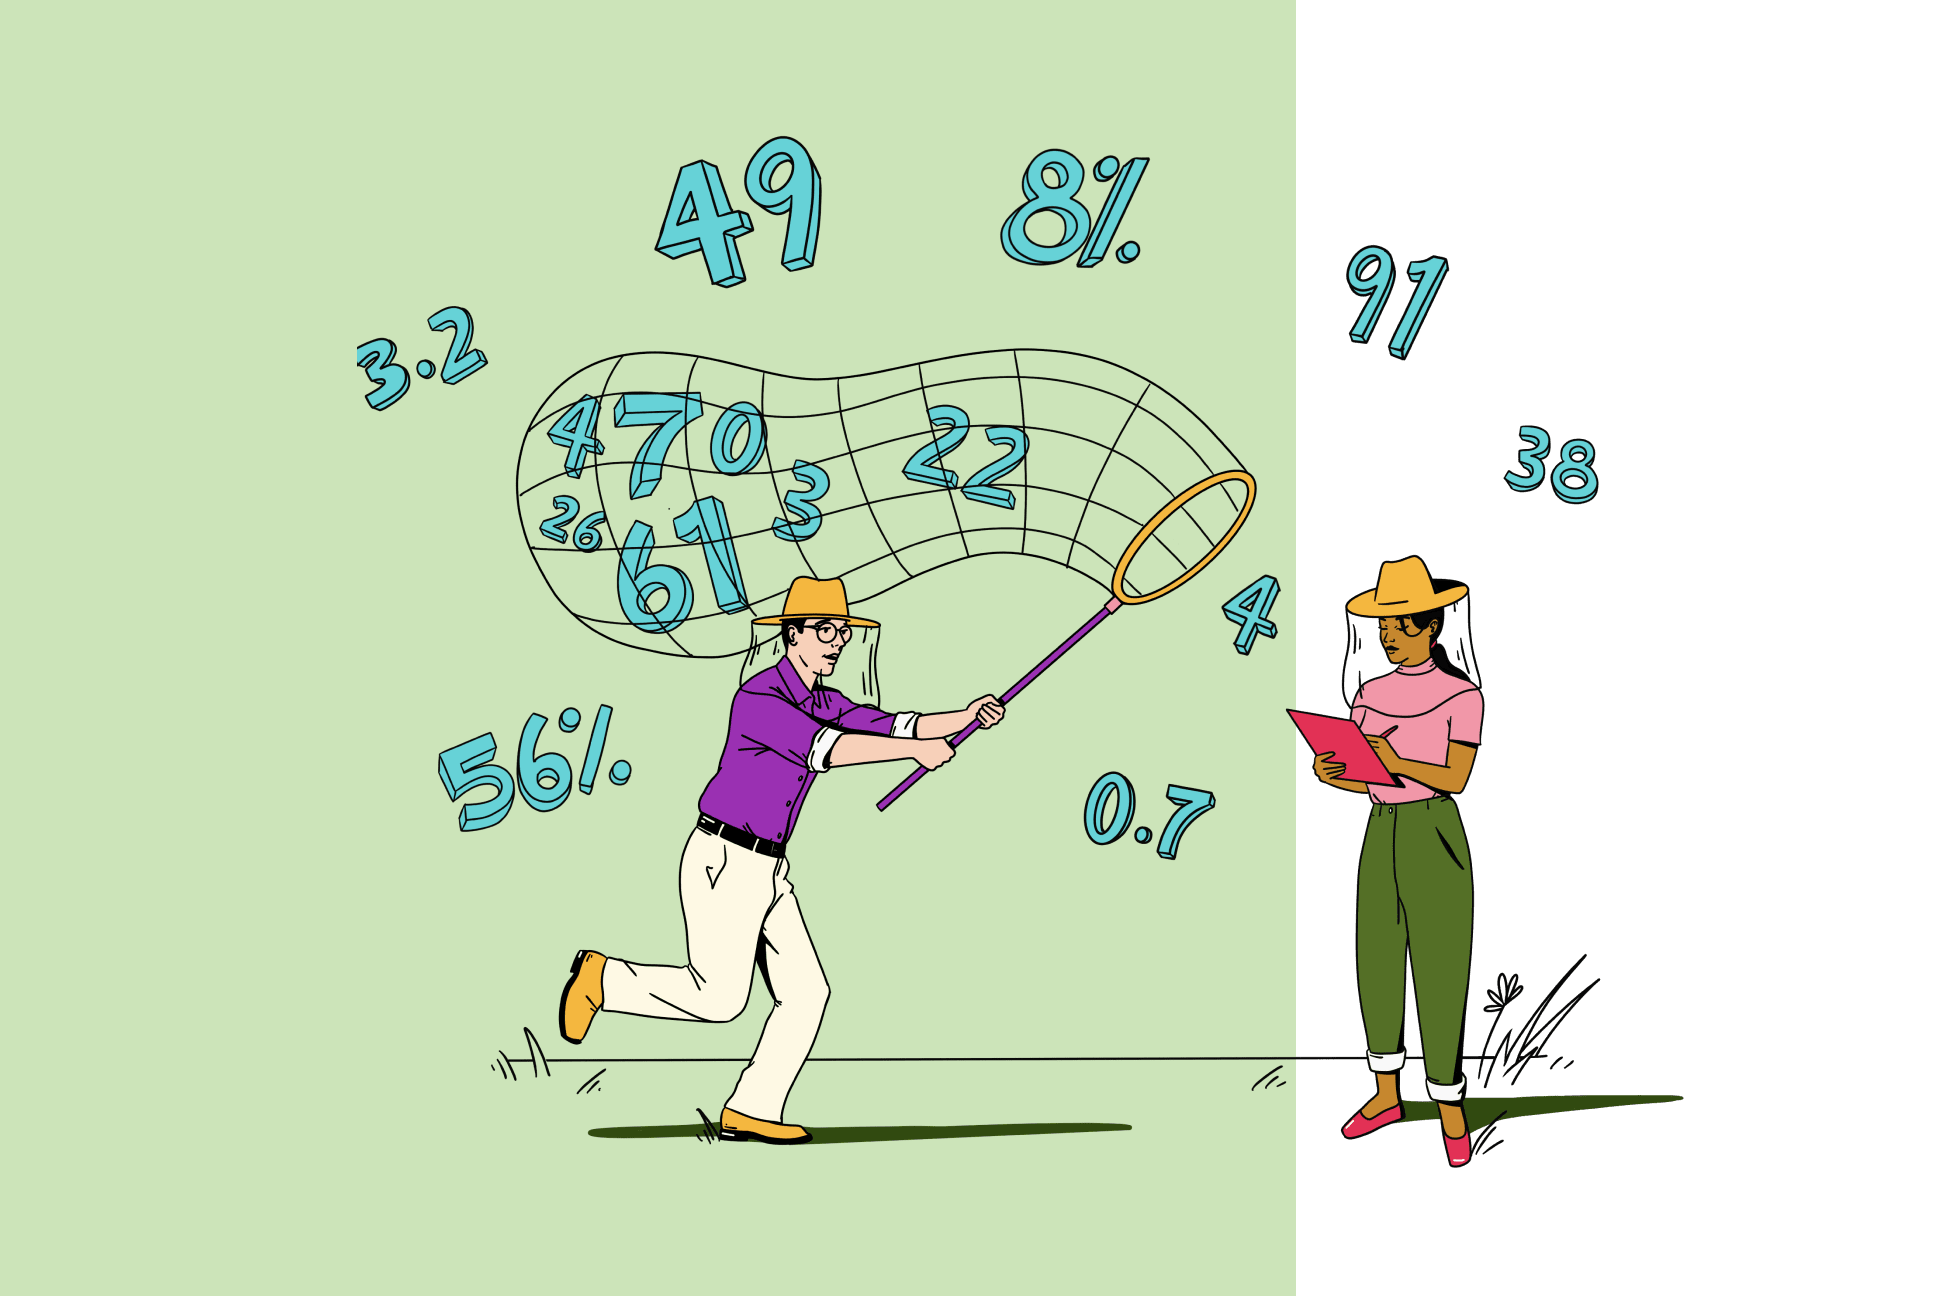 Illustration of two people catching and cataloging stylized numbers and mathematical figures in a large net